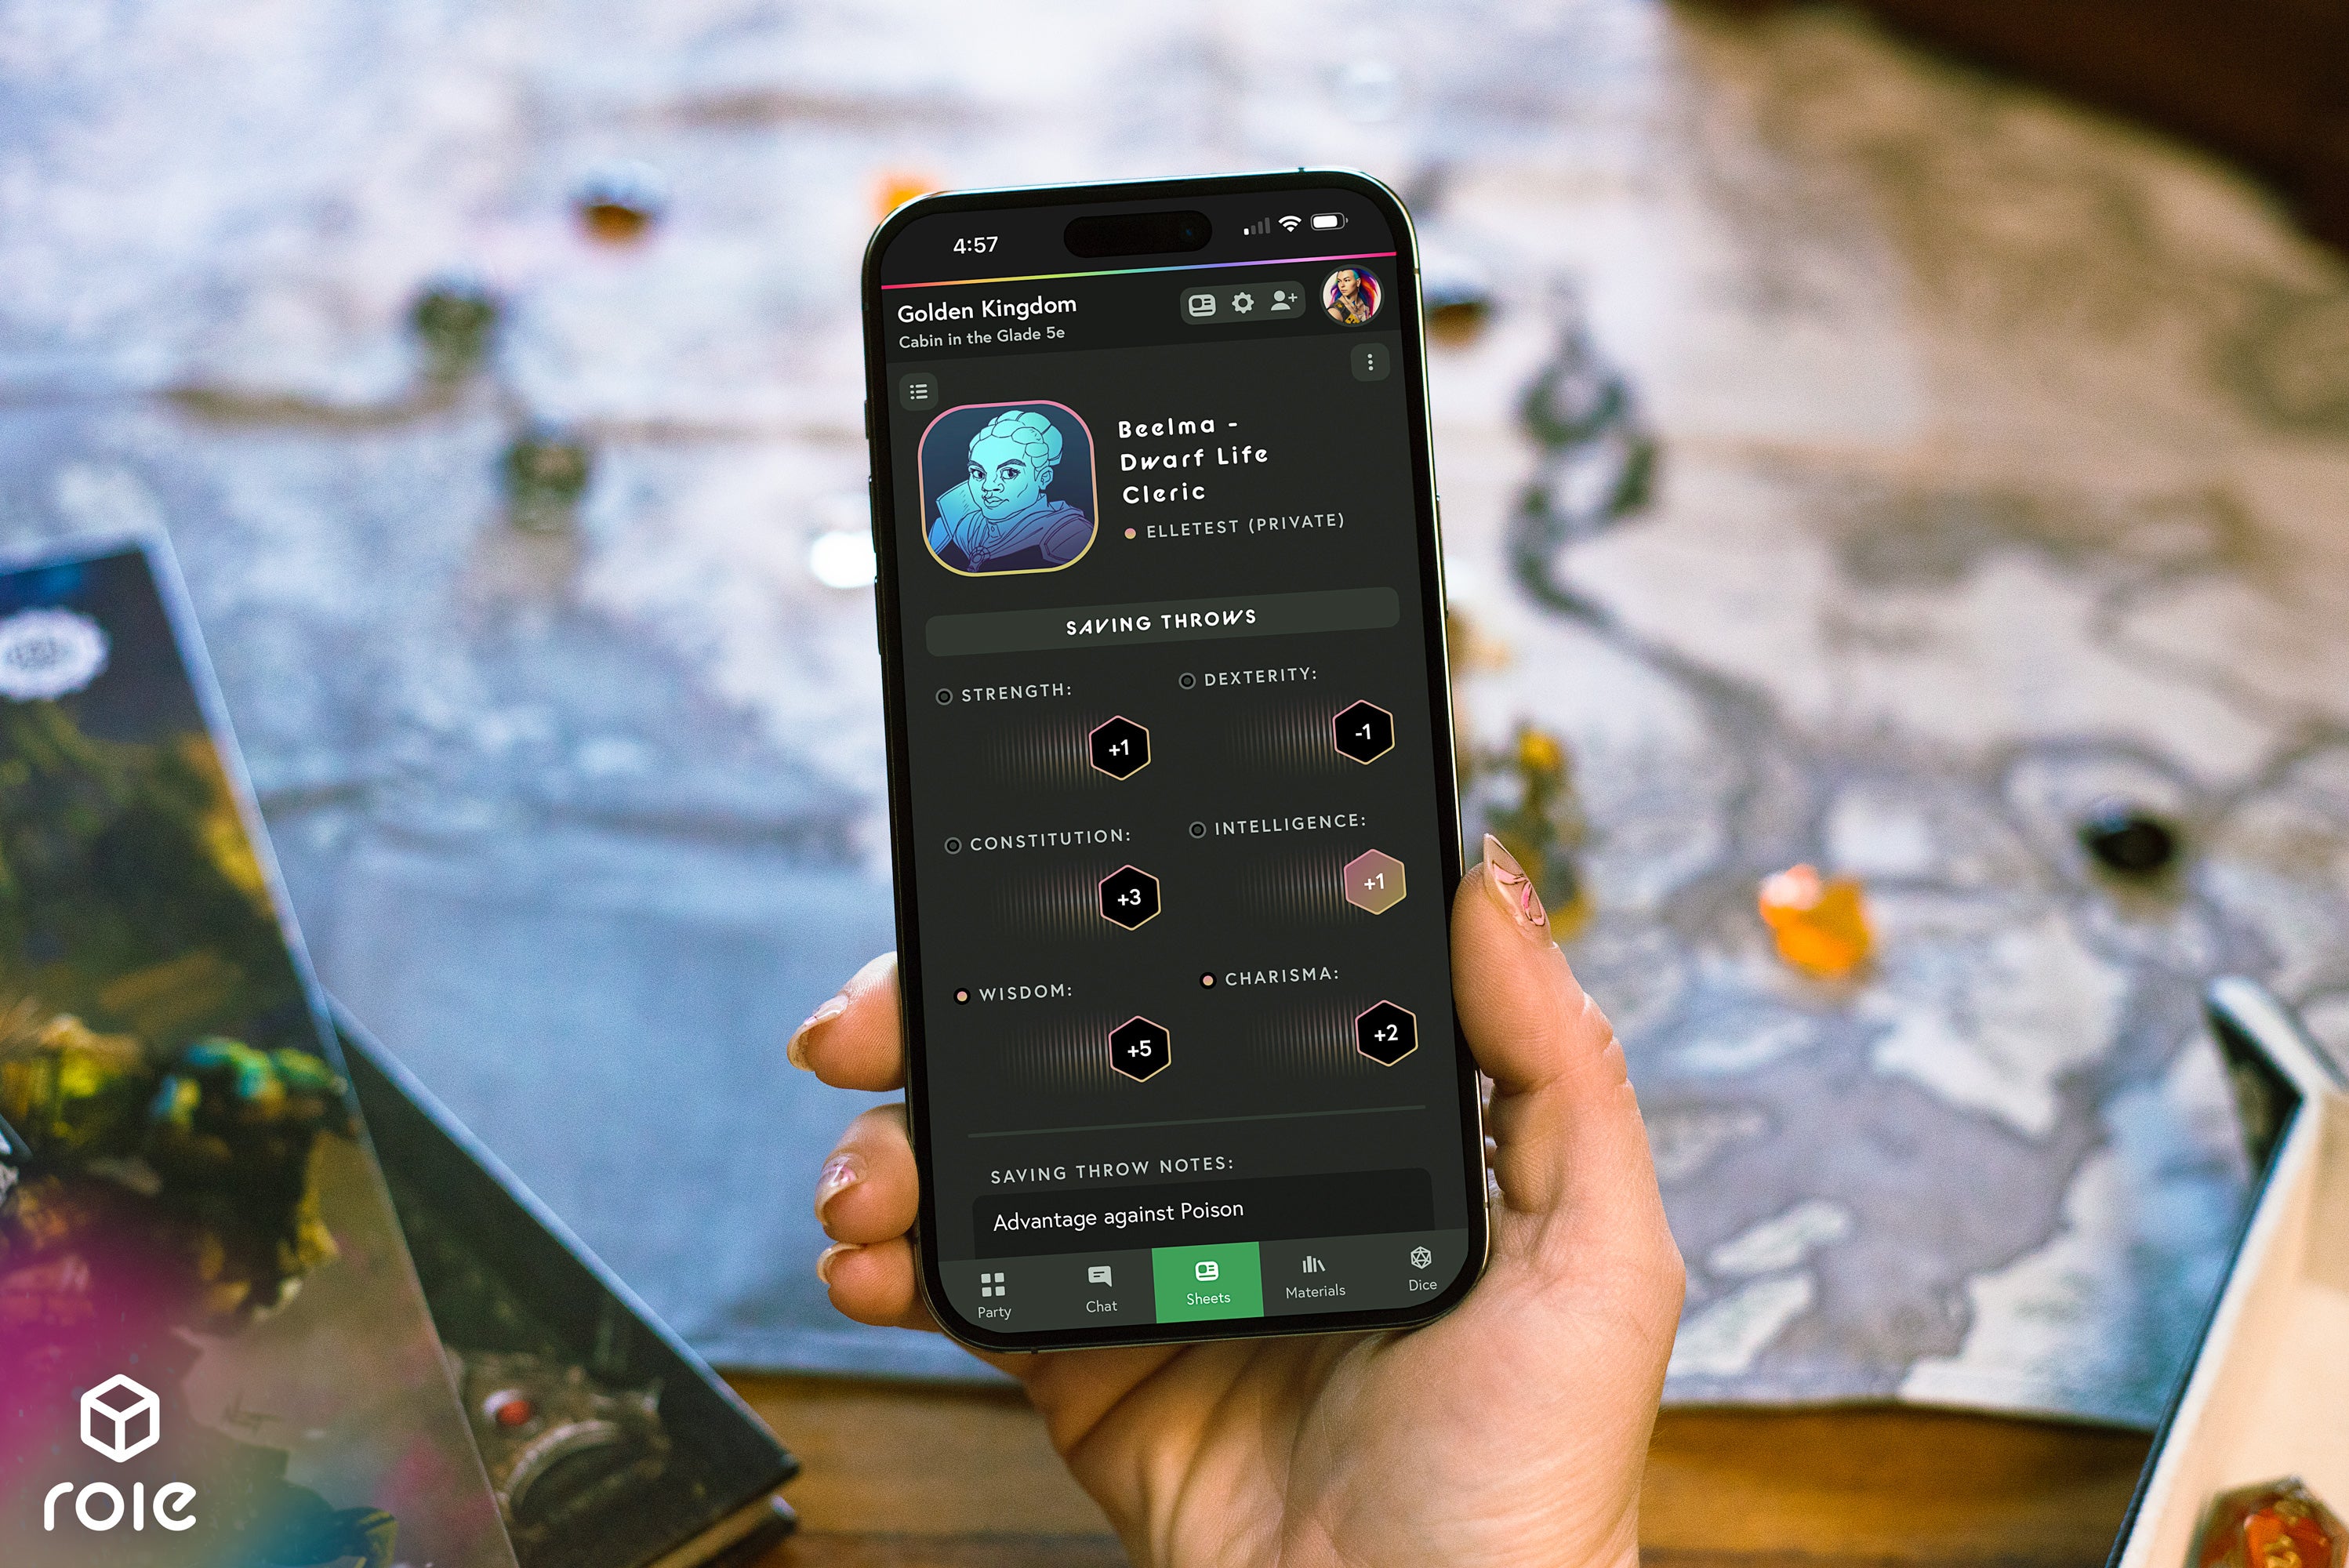 Bring Tabletop Games to Your Phone With Role’s New Mobile Features